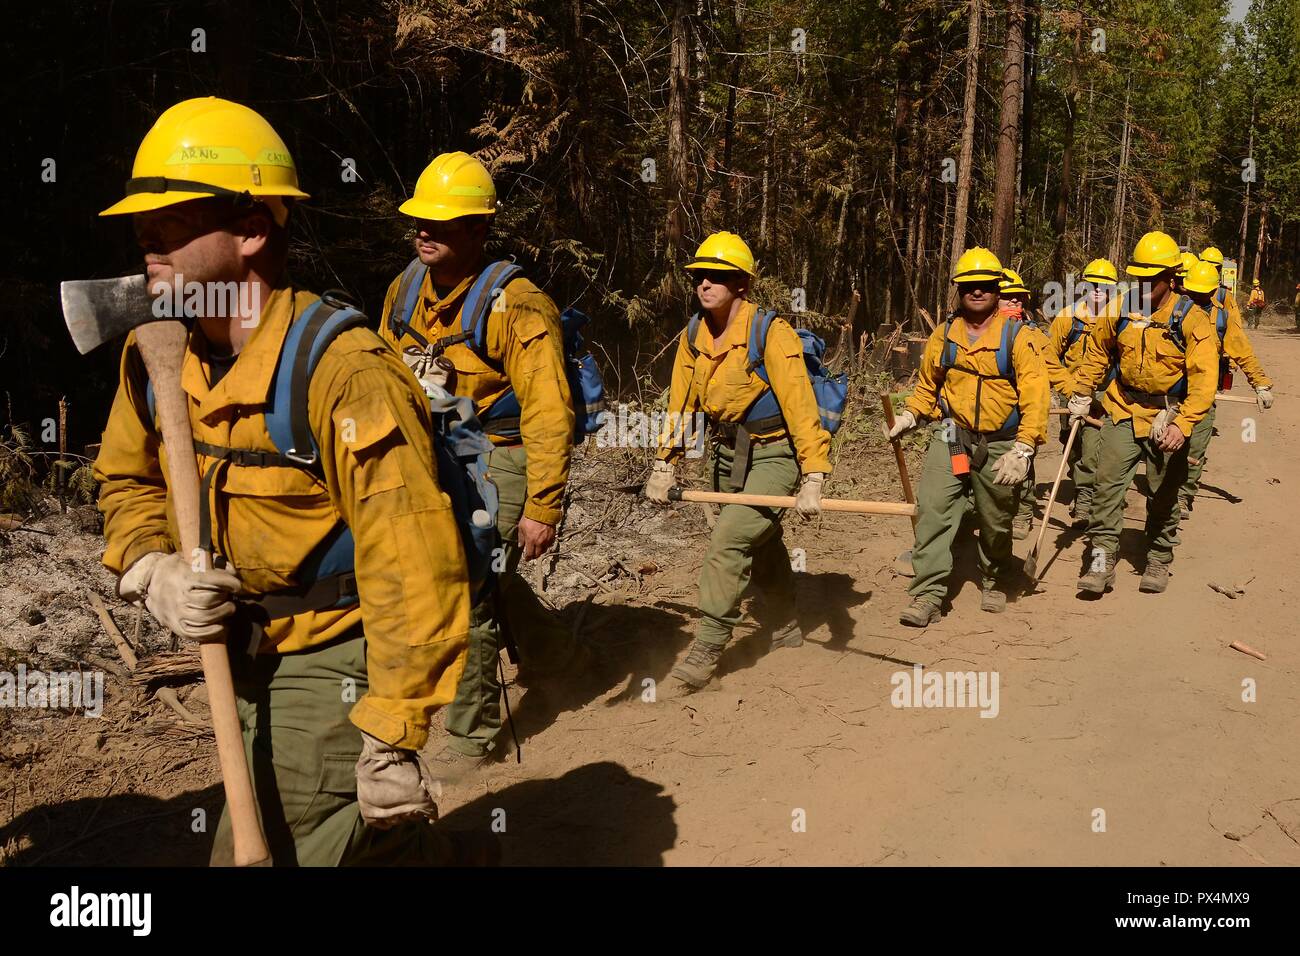 A group of Airmen from the Washington Air National Guard, wearing yellow safety gear and blue backpacks, walk in a line along a dirt road, with forest visible in the background, on their return from fighting the Sheep Creek Fire, located in the Sheep Creek area near Northport, Washington, USA, image courtesy Technical sergeant Timothy Chacon and the Joint Forces Headquarters, Washington National Guard, August 6, 2018. () Stock Photo